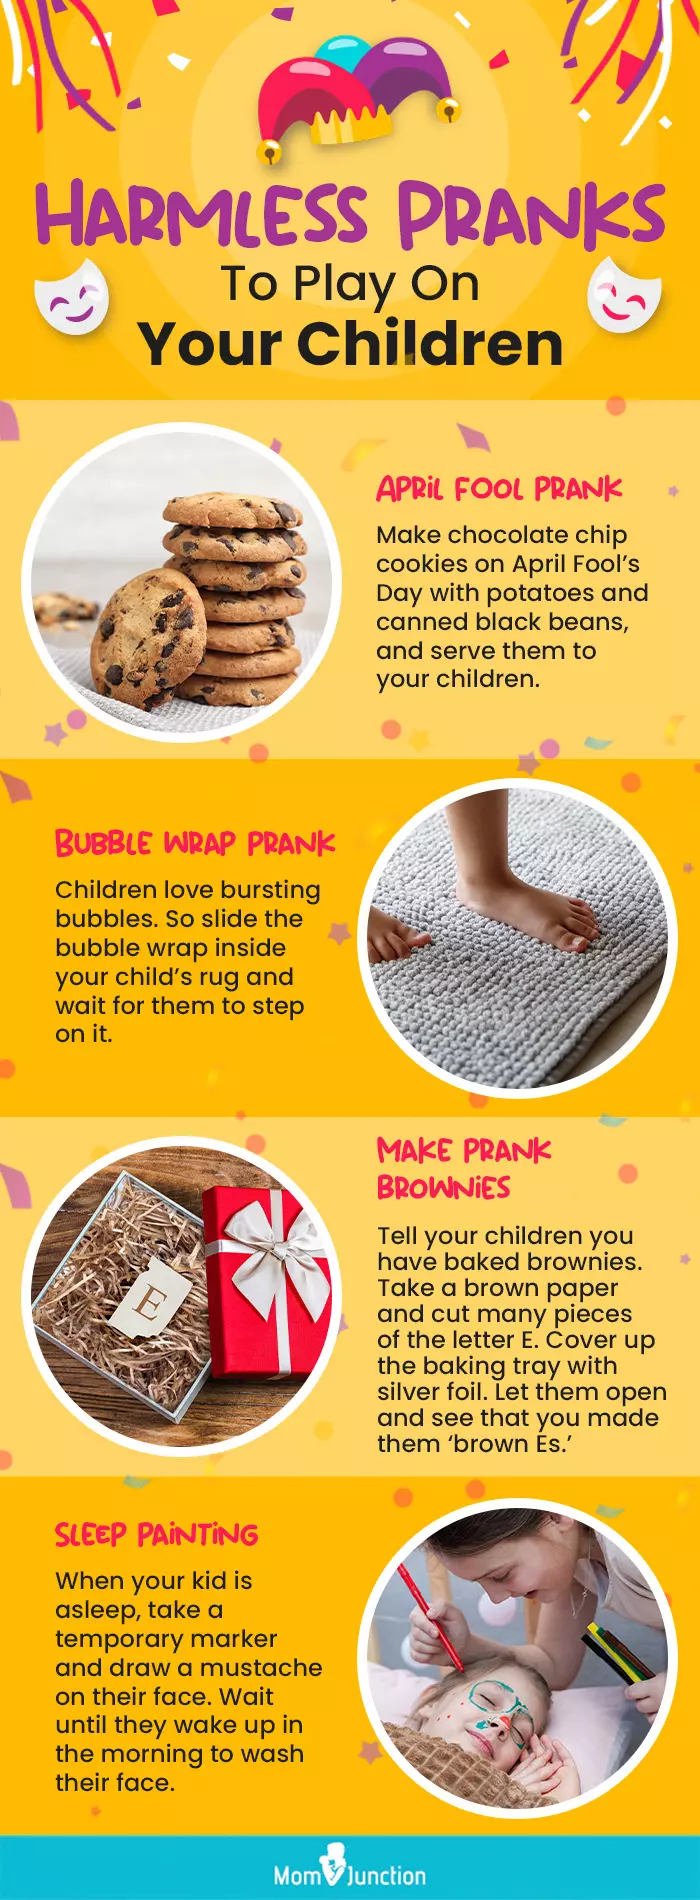 harmless pranks to play on your children (infographic)